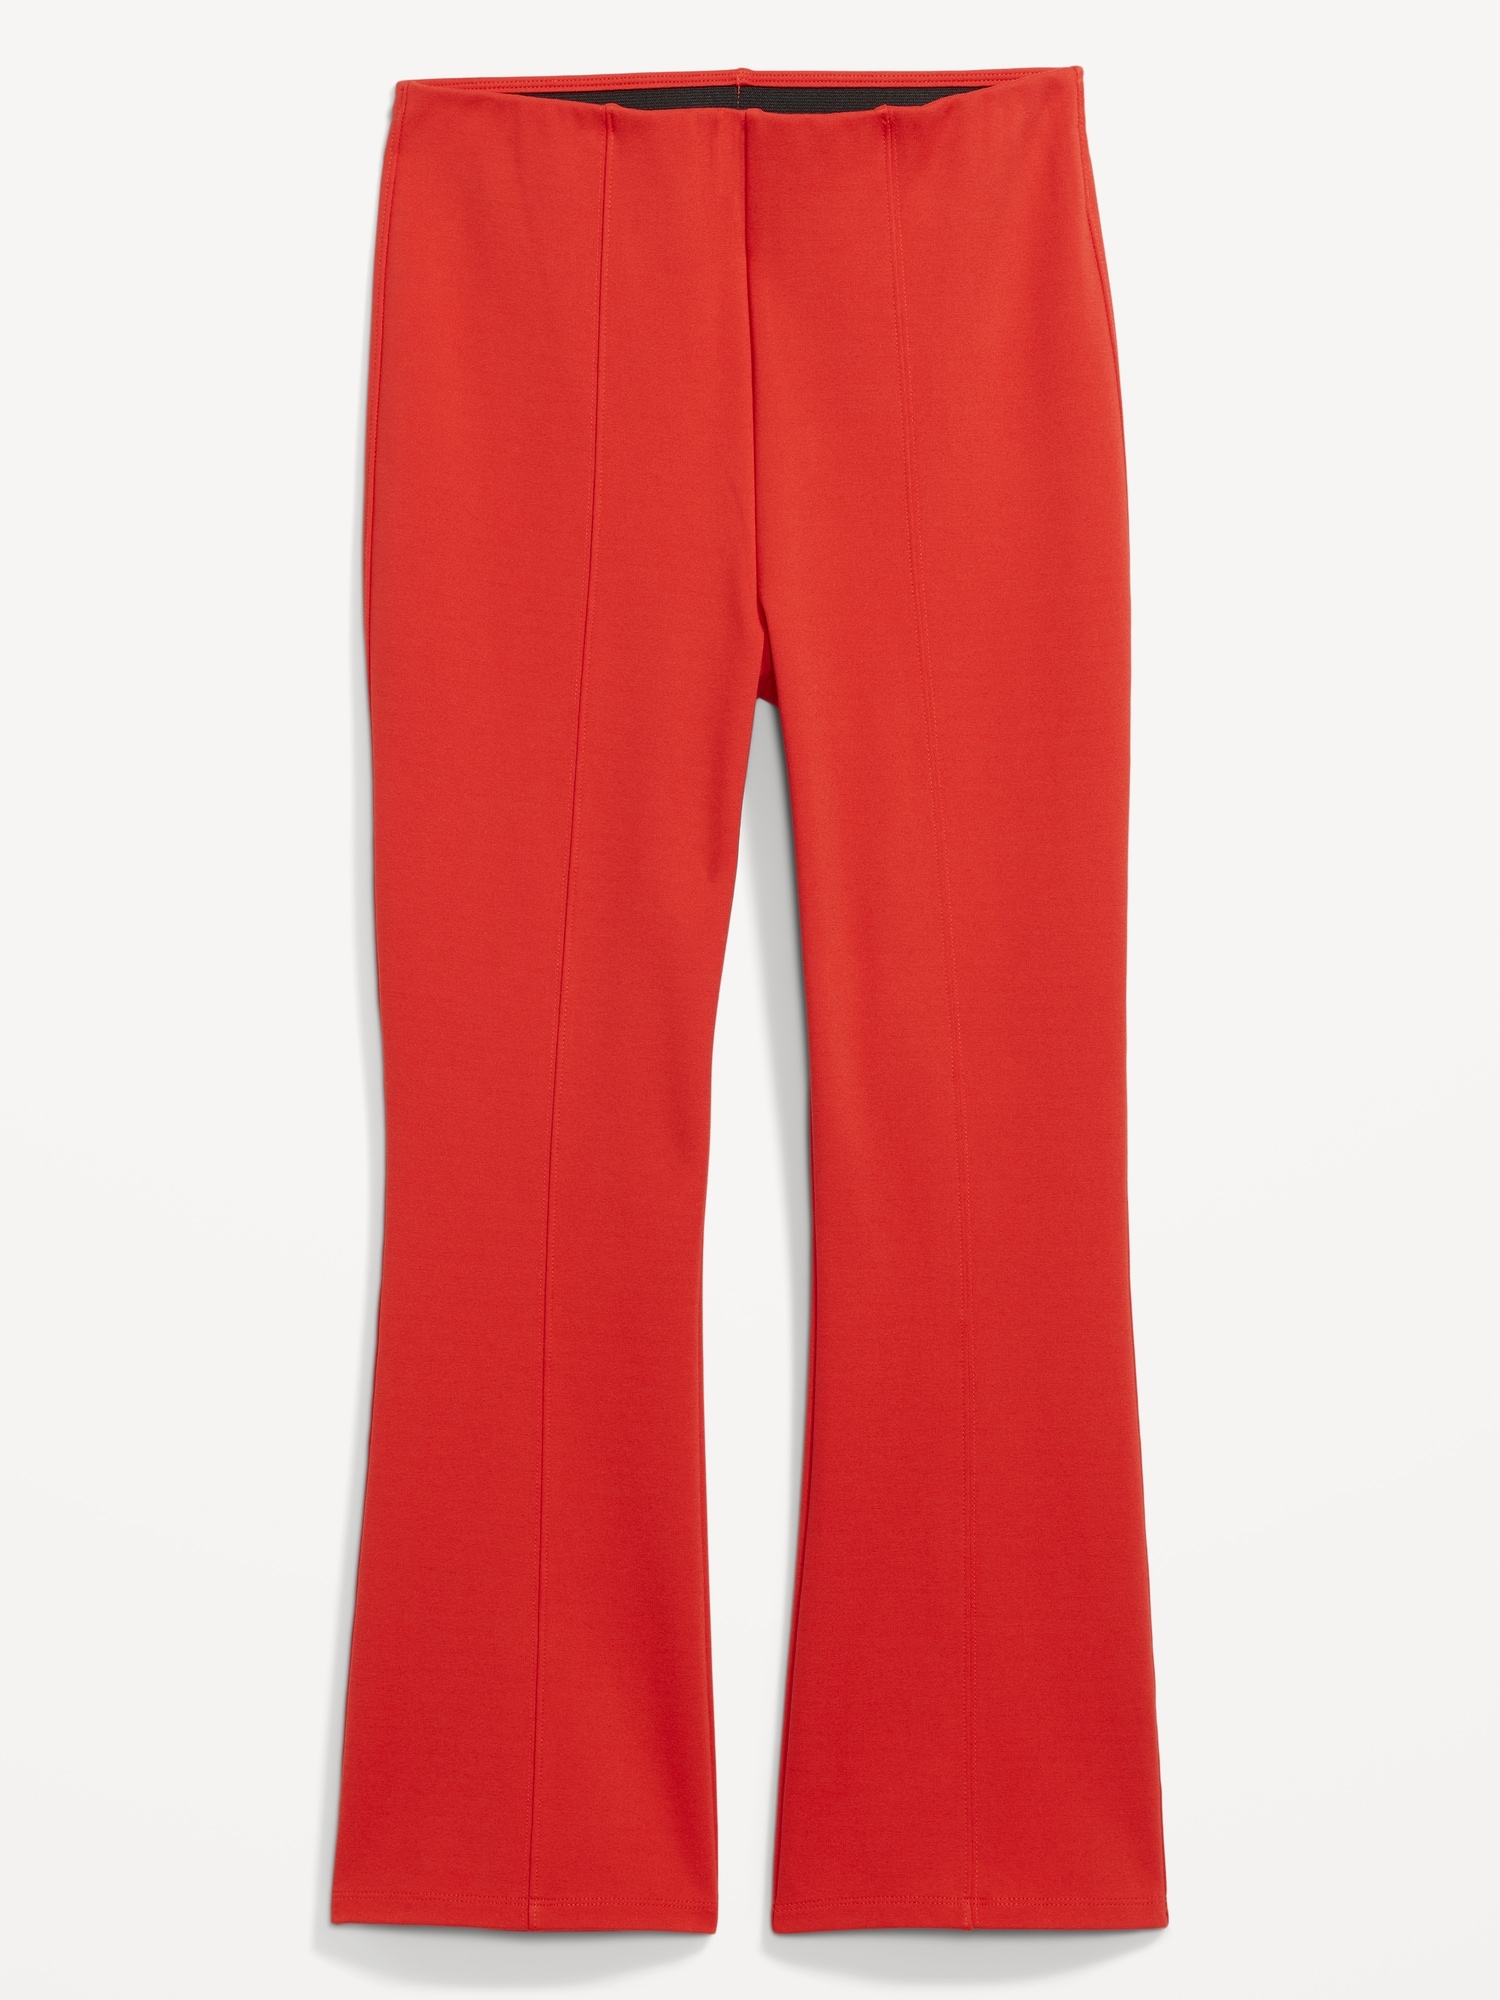 Red Flare Jeans $62 Red Dress  Red flare pants outfit, Red flare